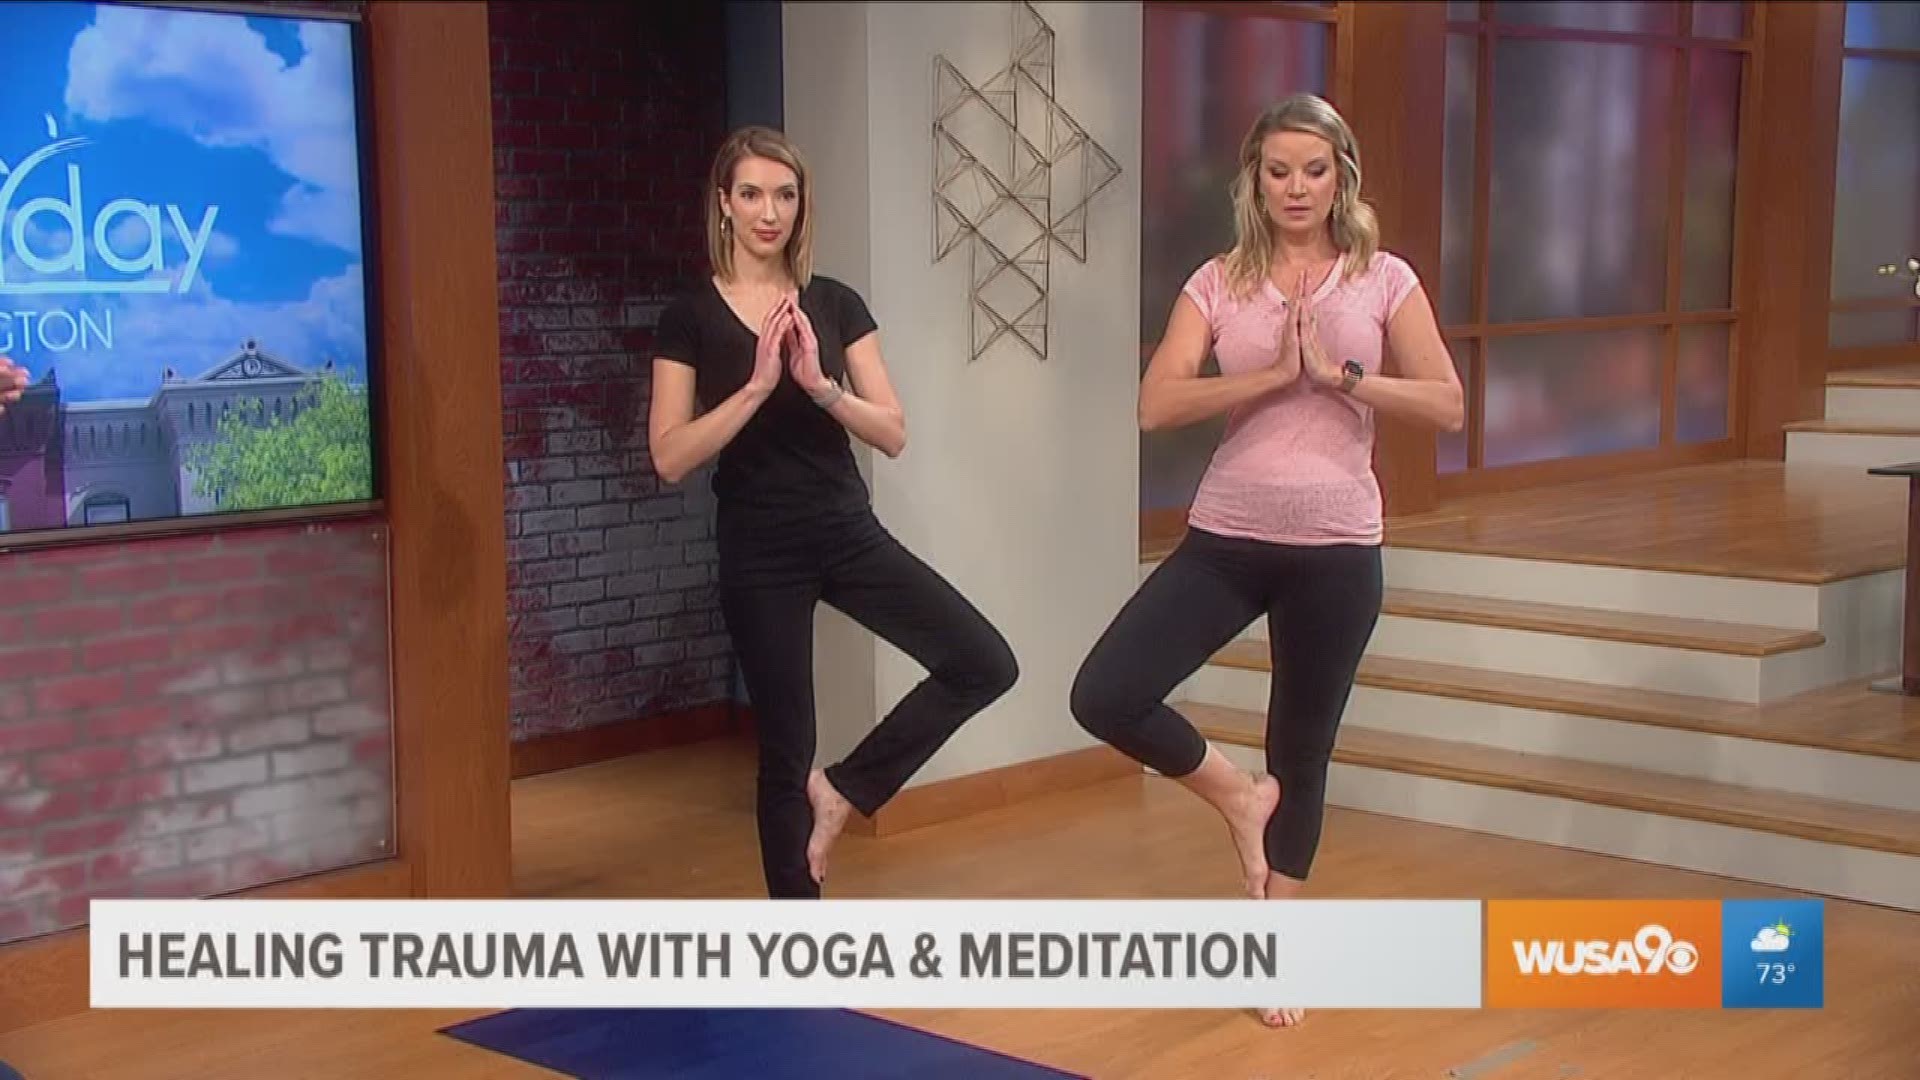 Quentin Vennie, Vice President of Yoga Alliance Foundation shares easy yoga moves to help combat anxiety.